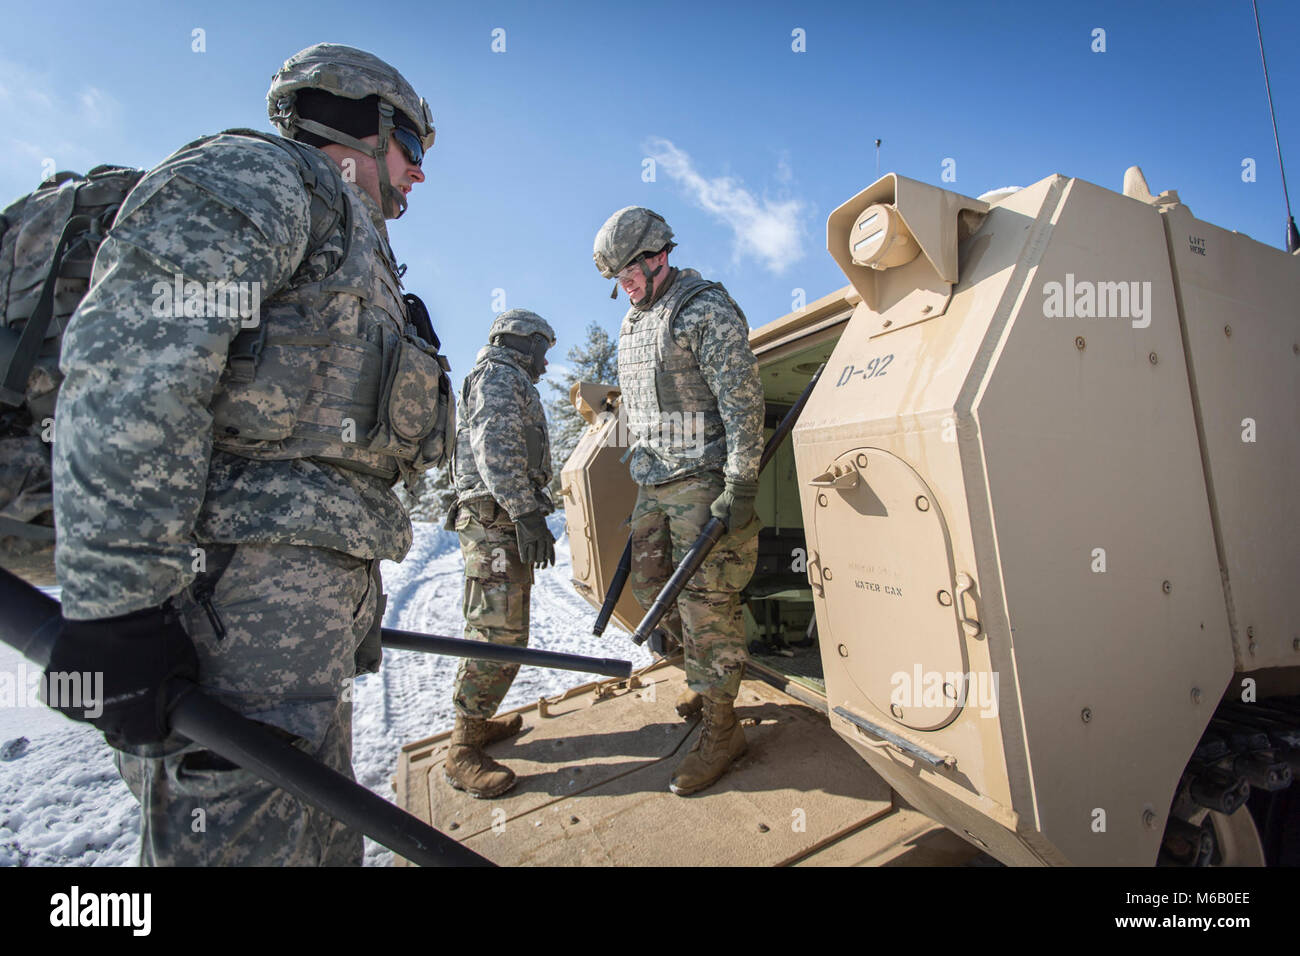 U.S. Army Reserve Soldiers from the 366th Mobility Augmentation Company, remove equipment from an M113 Armored Personnel Carrier during Operation Cold Steel II at Fort McCoy, Wis., Feb. 25, 2018. Operation Cold Steel is the U.S. Army Reserve’s crew-served weapons qualification and validation exercise to ensure America’s Army Reserve units and Soldiers are trained and ready to deploy on short-notice as part of Ready Force X and bring combat-ready and lethal firepower in support of the Army and our joint partners anywhere in the world. (U.S. Army Reserve Stock Photo